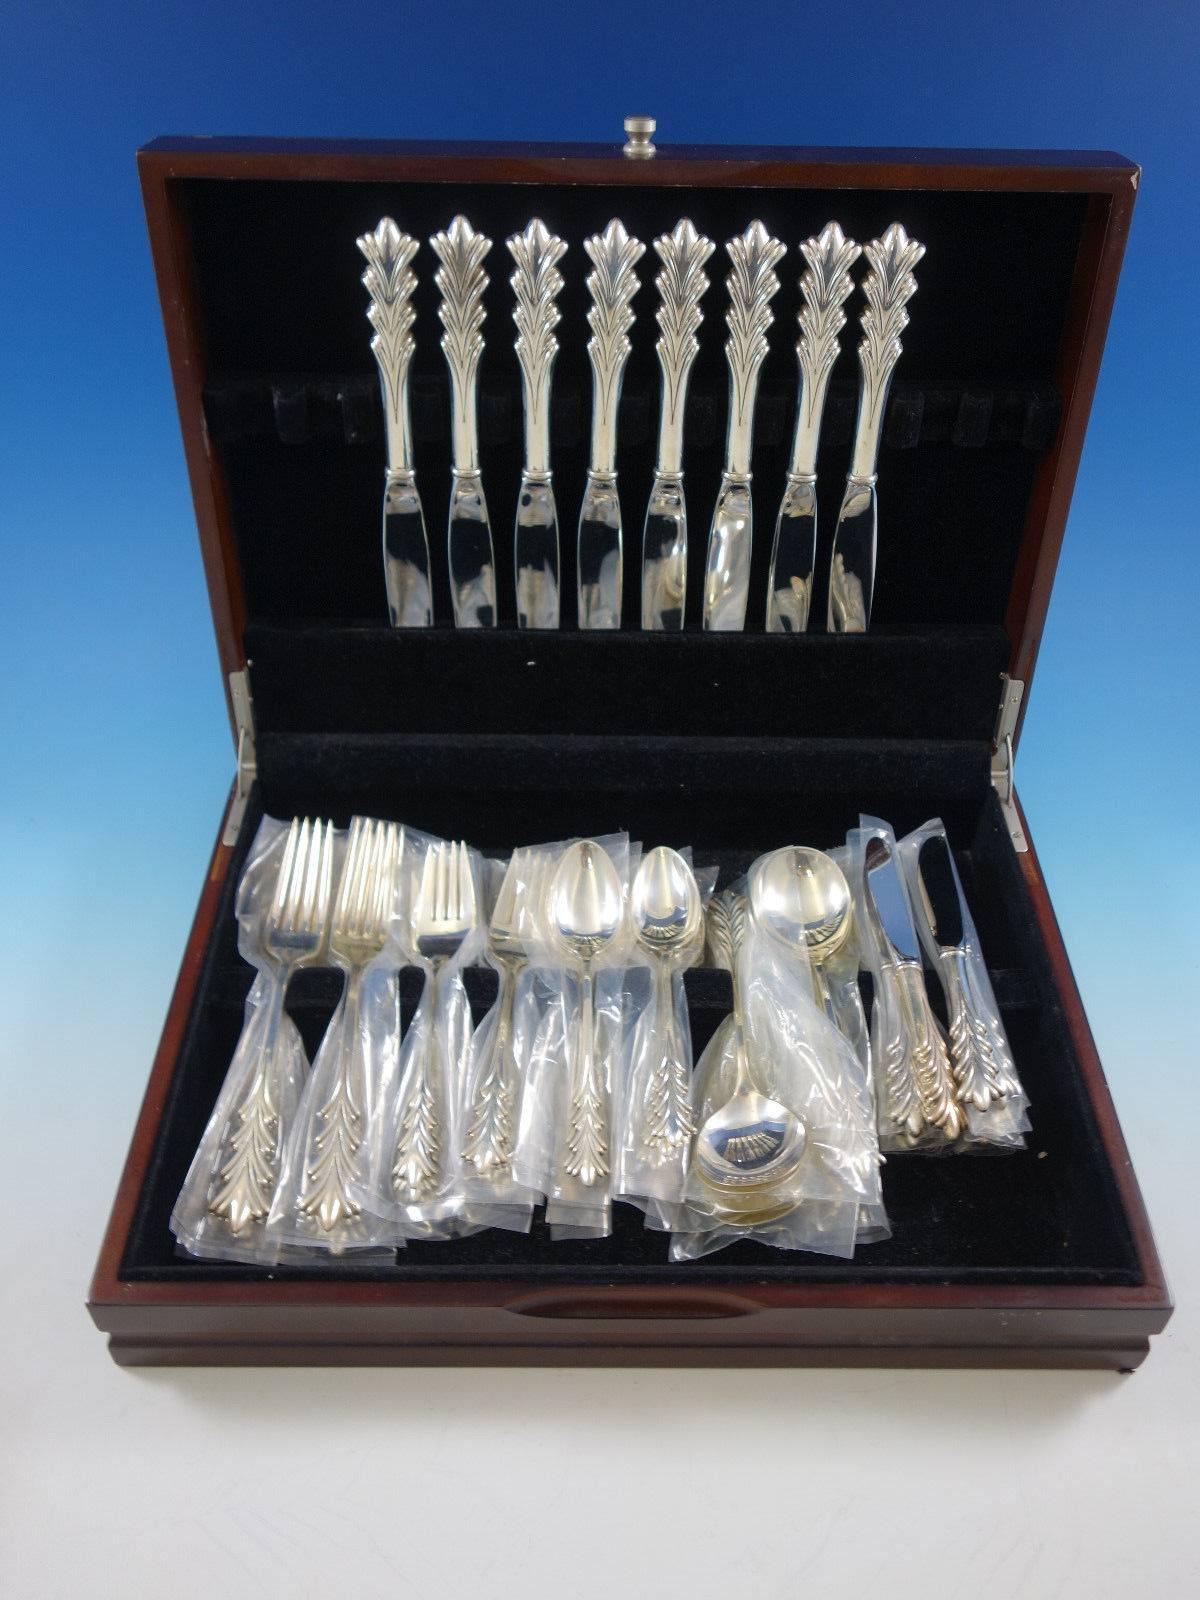 Crest of Arden by Tuttle sterling silver set, 56 pieces. This set includes: 

12 dinner knives, 9 1/2